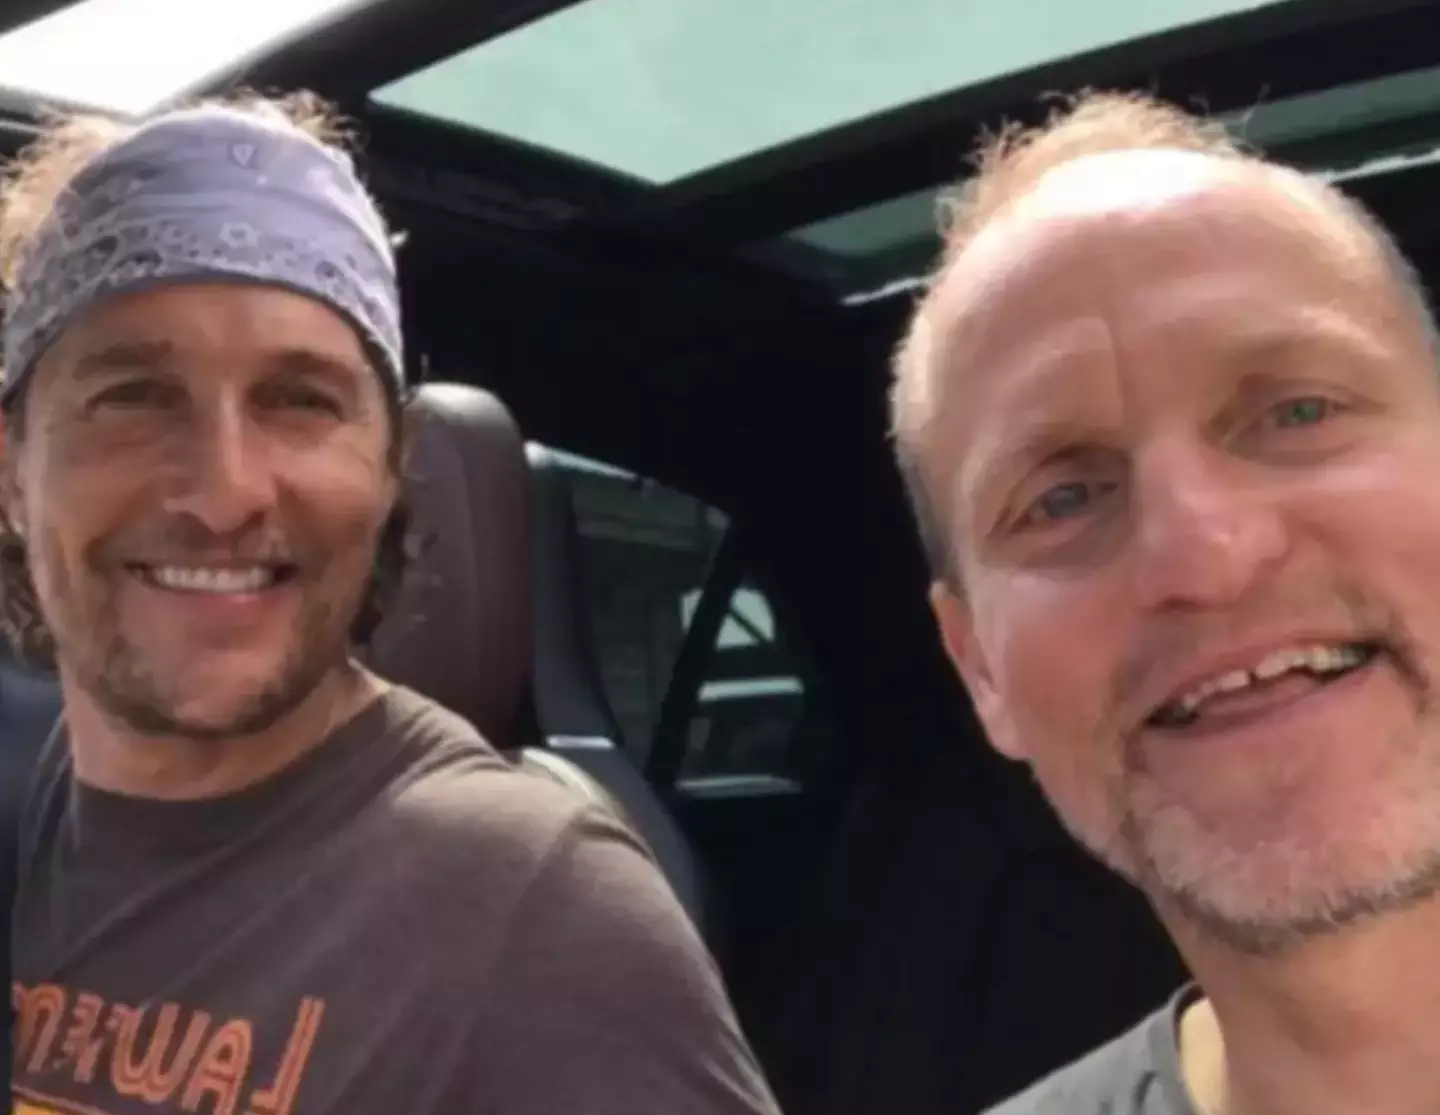 Woody Harrelson and Matthew McConaughey have revealed they could be related.